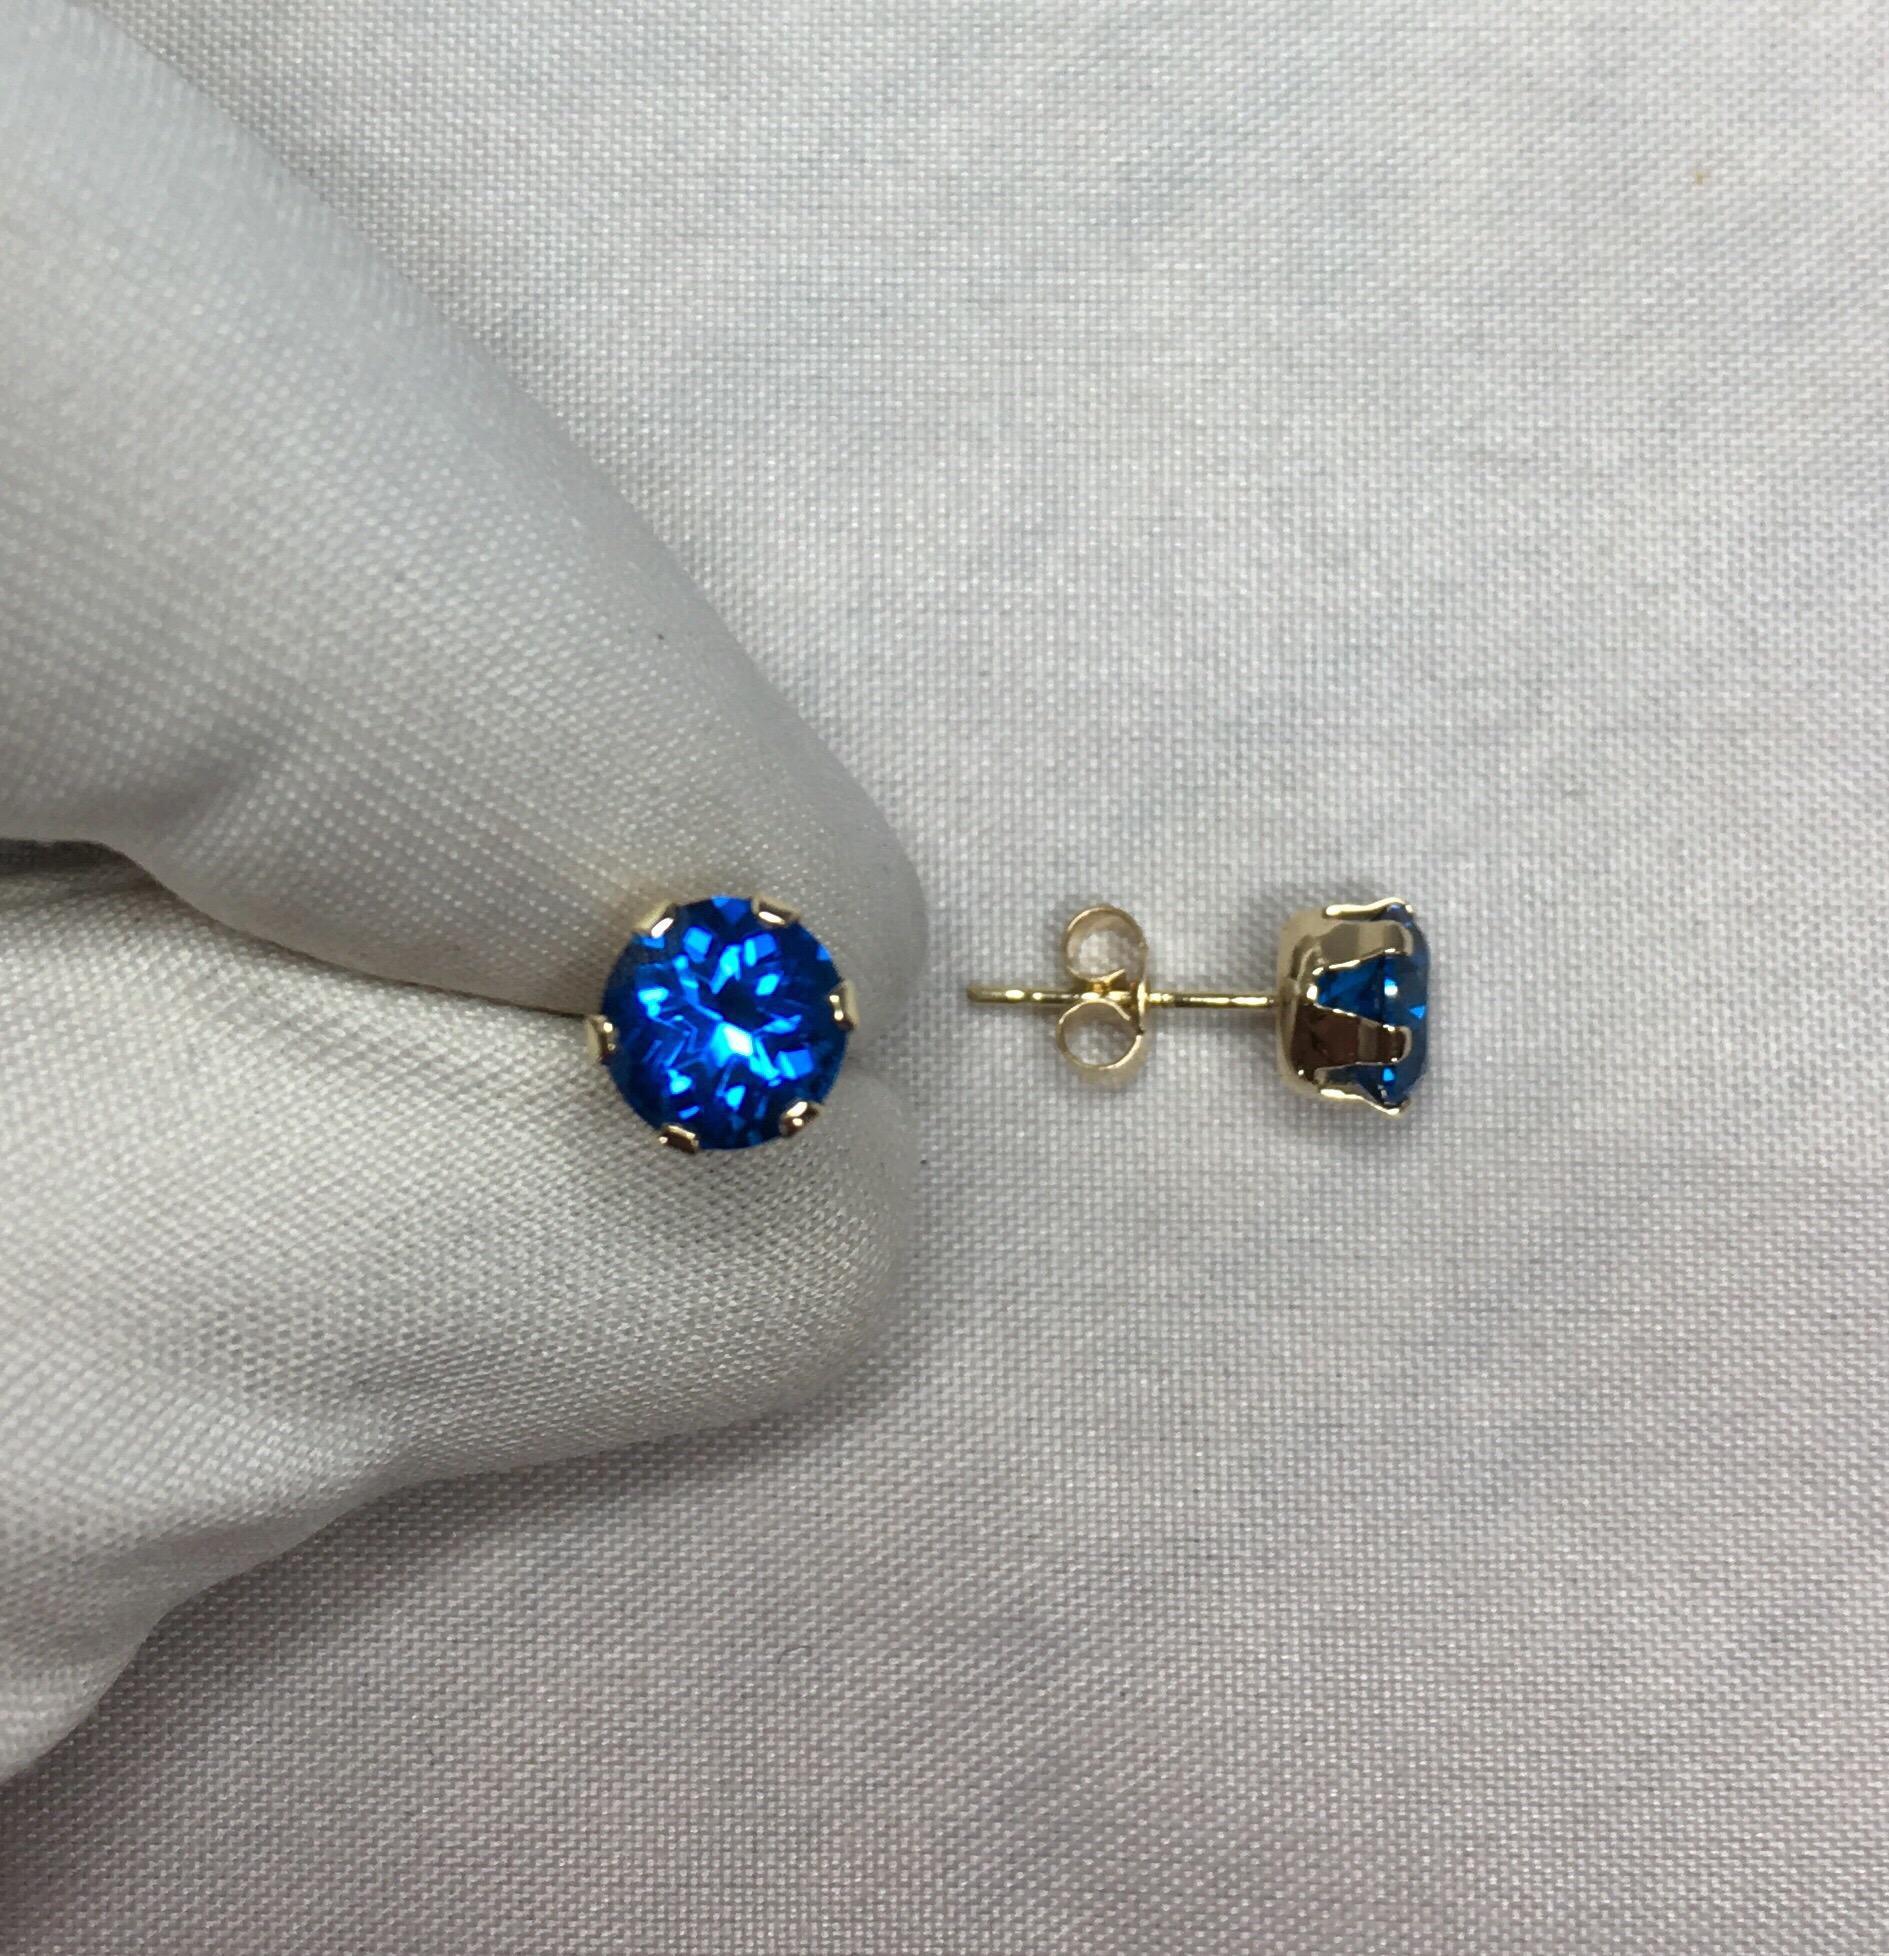 Stunning natural vivid blue topaz gemstones set in 9k gold studs.

2.00 carat matching pair of bright blue topaz stones with vivid colour and excellent clarity. 
Fine quality stones.

6mm stones, with real depth of colour and lots of sparkle. 

Both